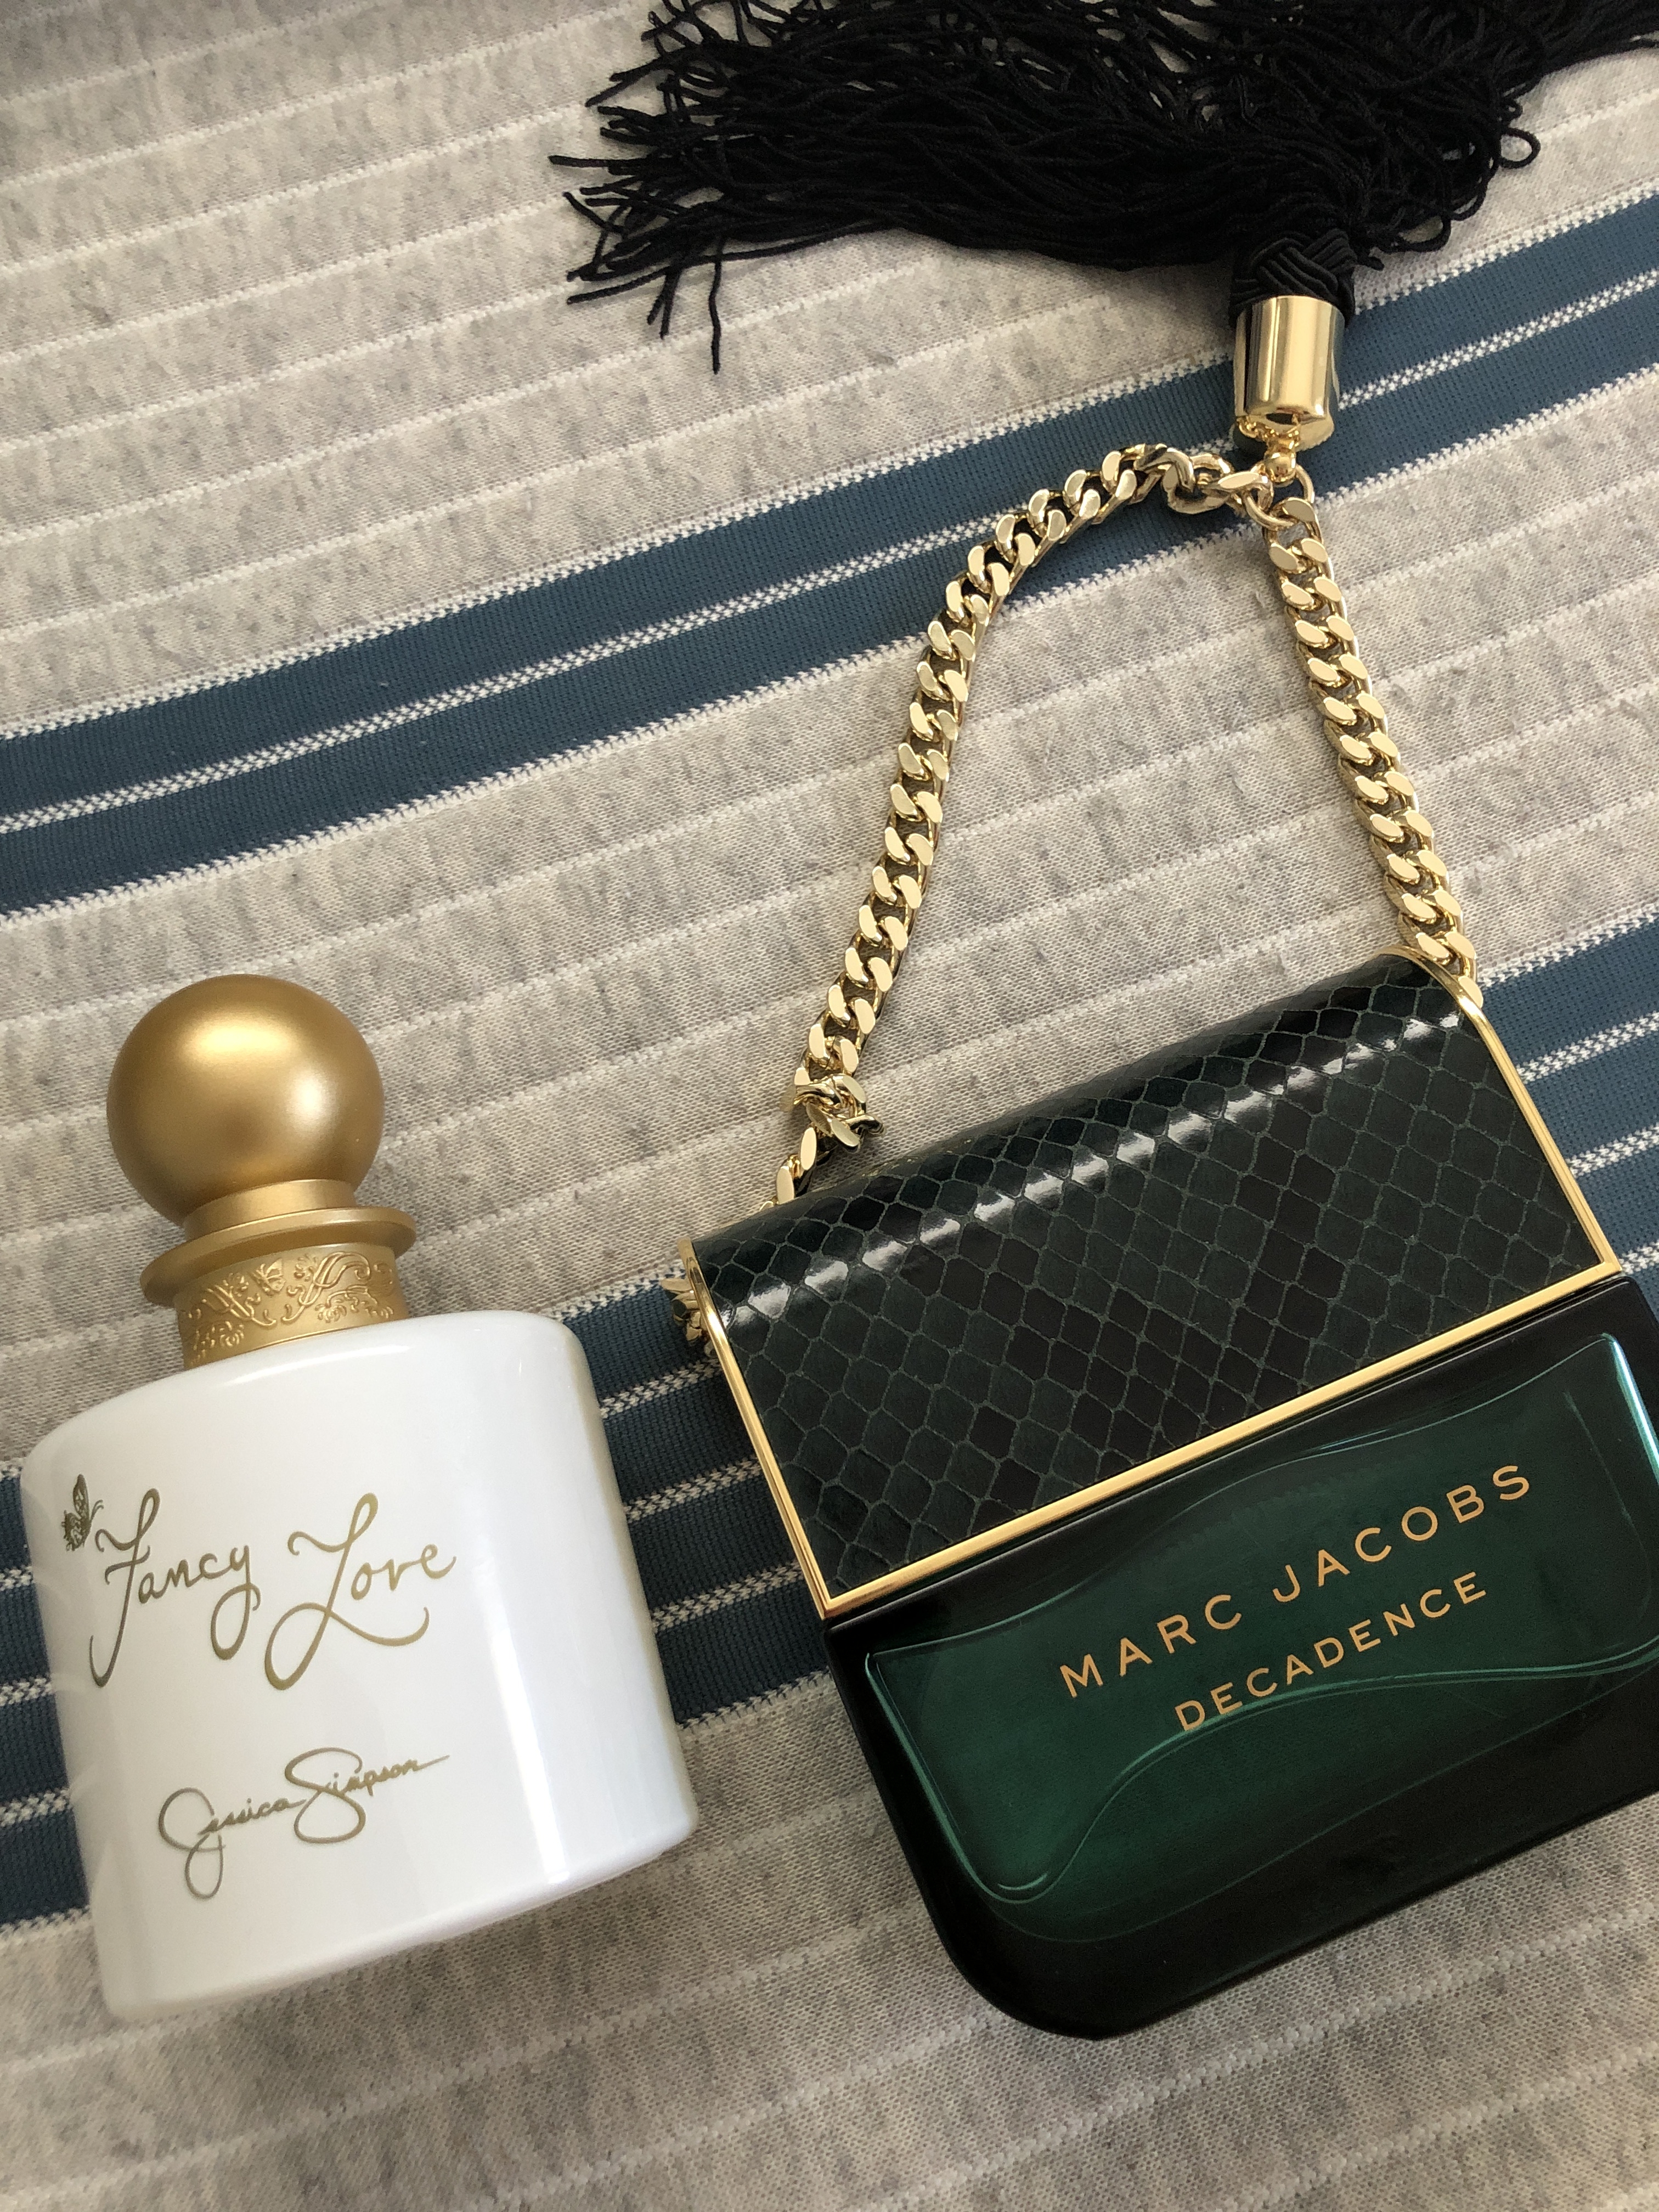 Review Luxury Brand Perfume : Under 1 Juta?! ✨, Gallery posted by  𝓼𝓱𝓮𝓵𝓵𝓪 👒🩰🎐